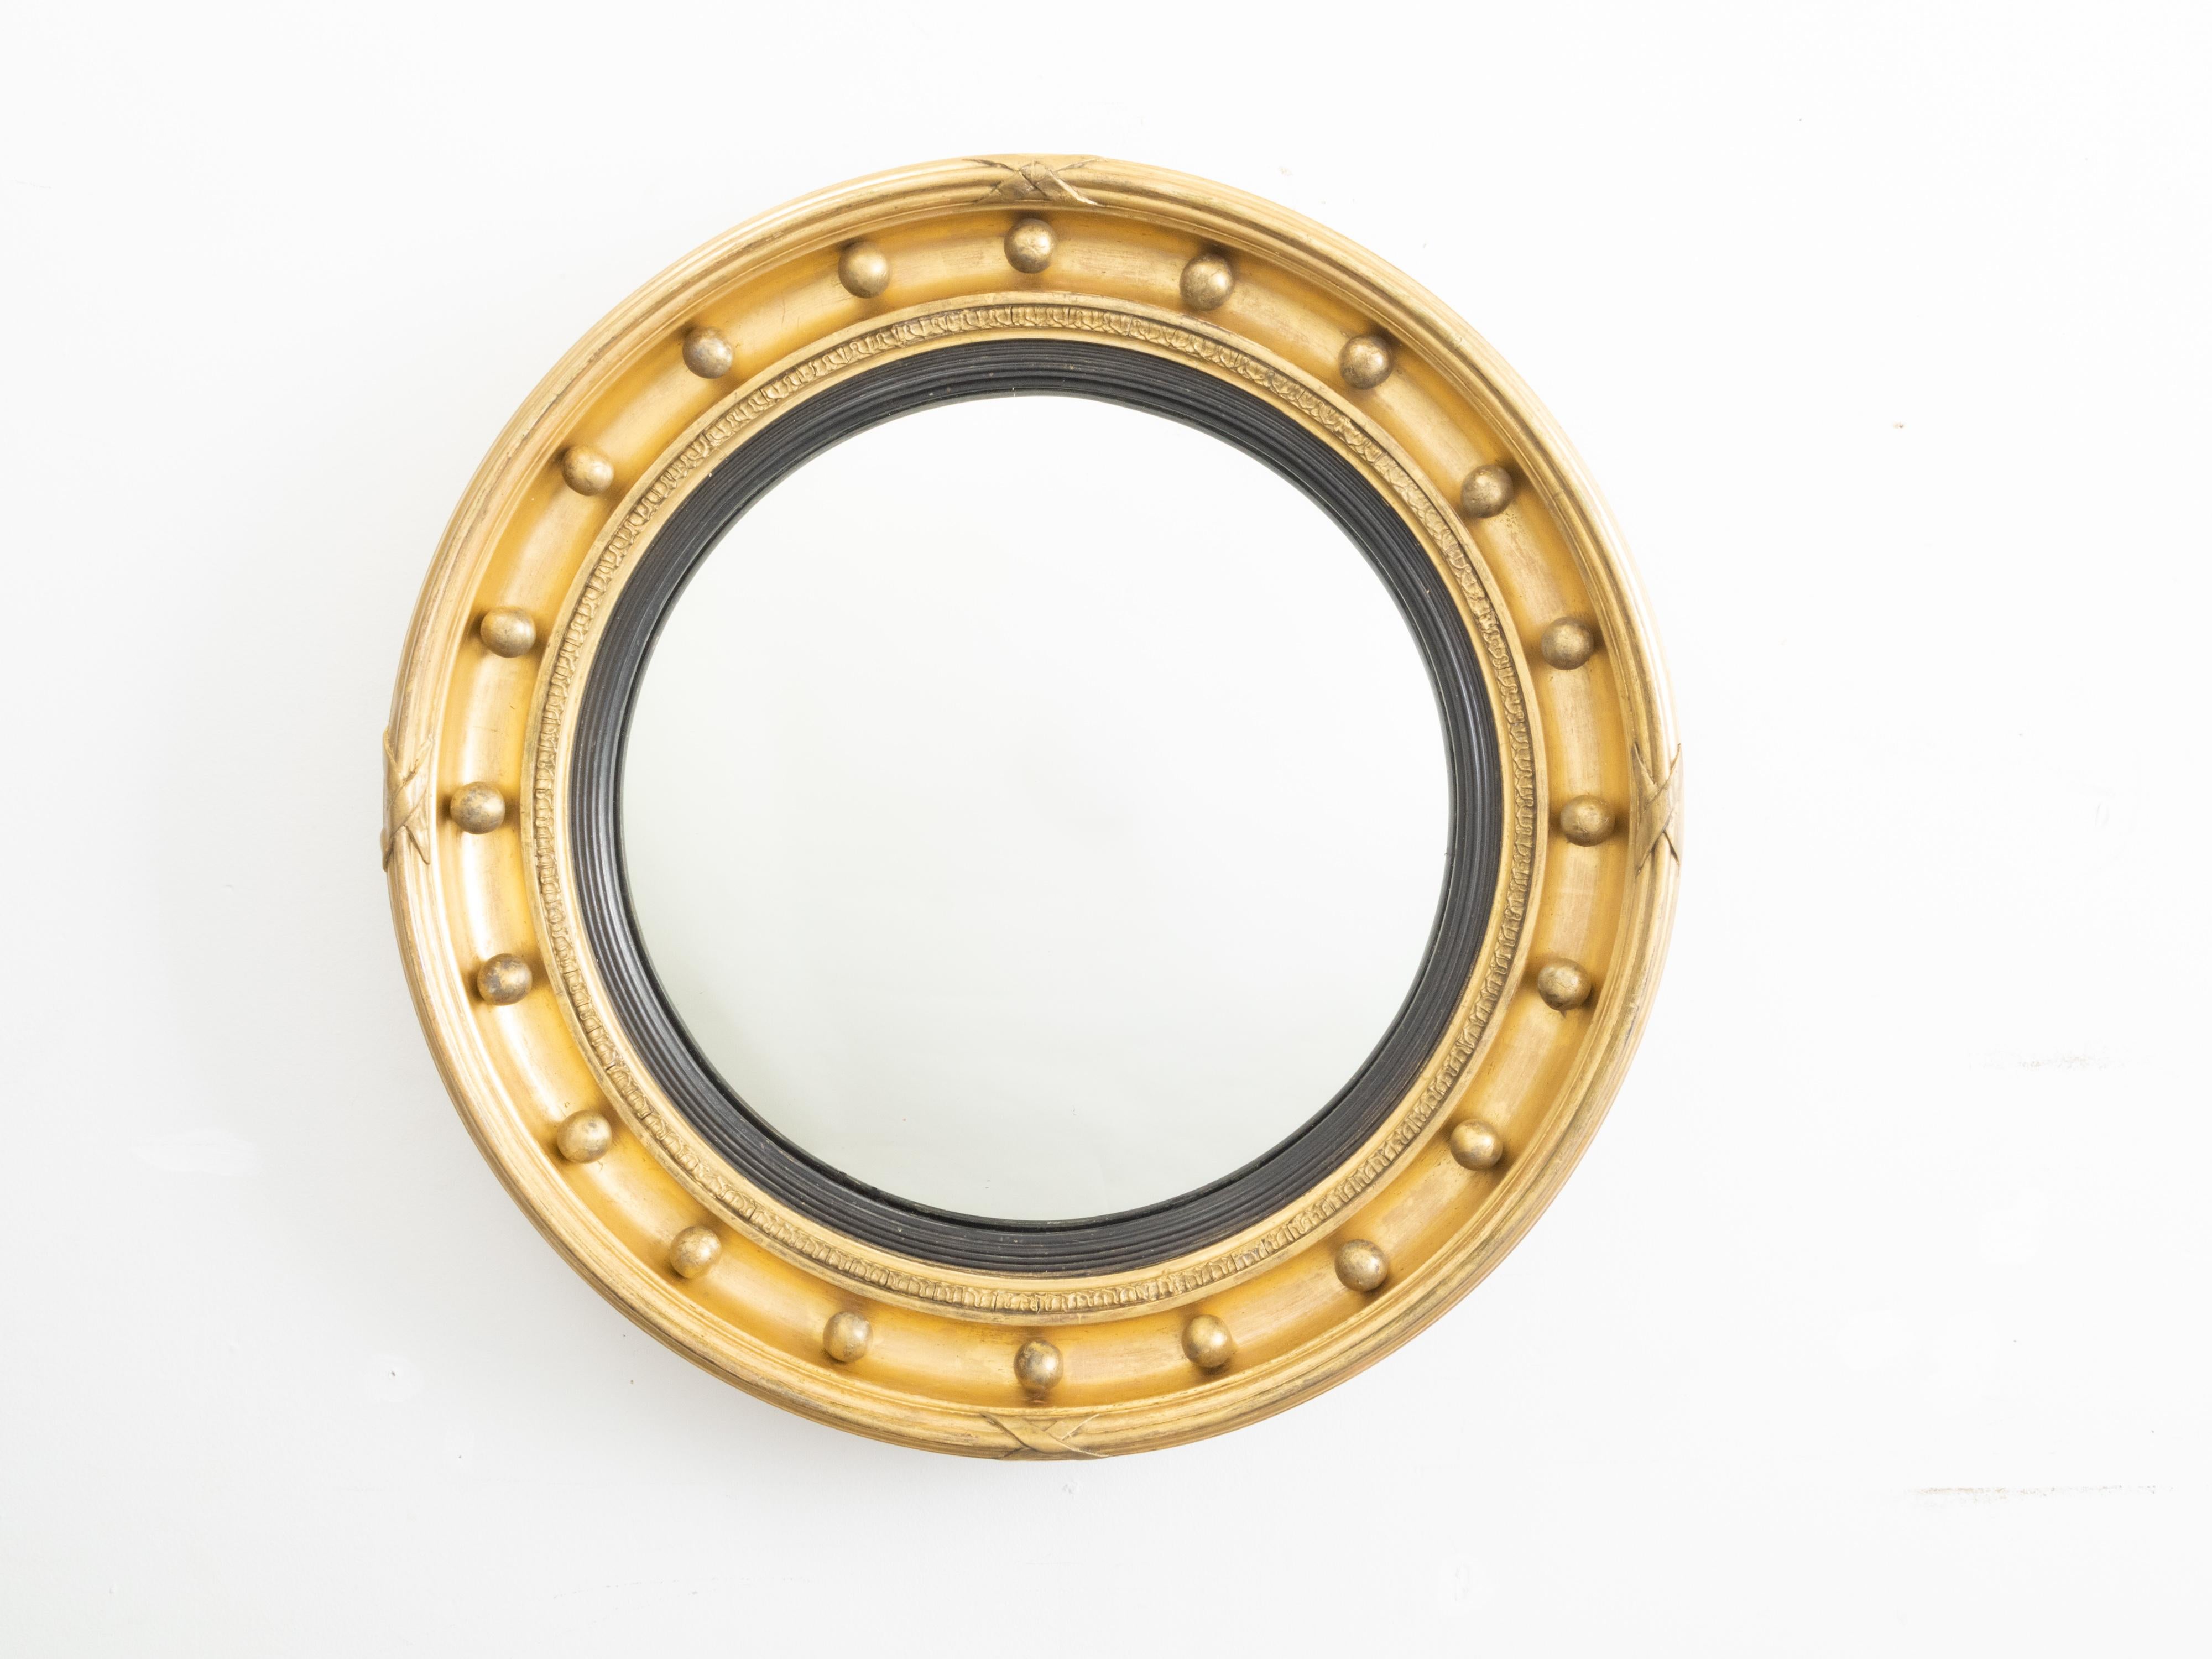 A small English giltwood bullseye girandole mirror from the 19th century with ebonized reeded accents. Created in England during the 19th century, this stylish circular mirror features a central mirror plate, surrounded by a reeded molding of